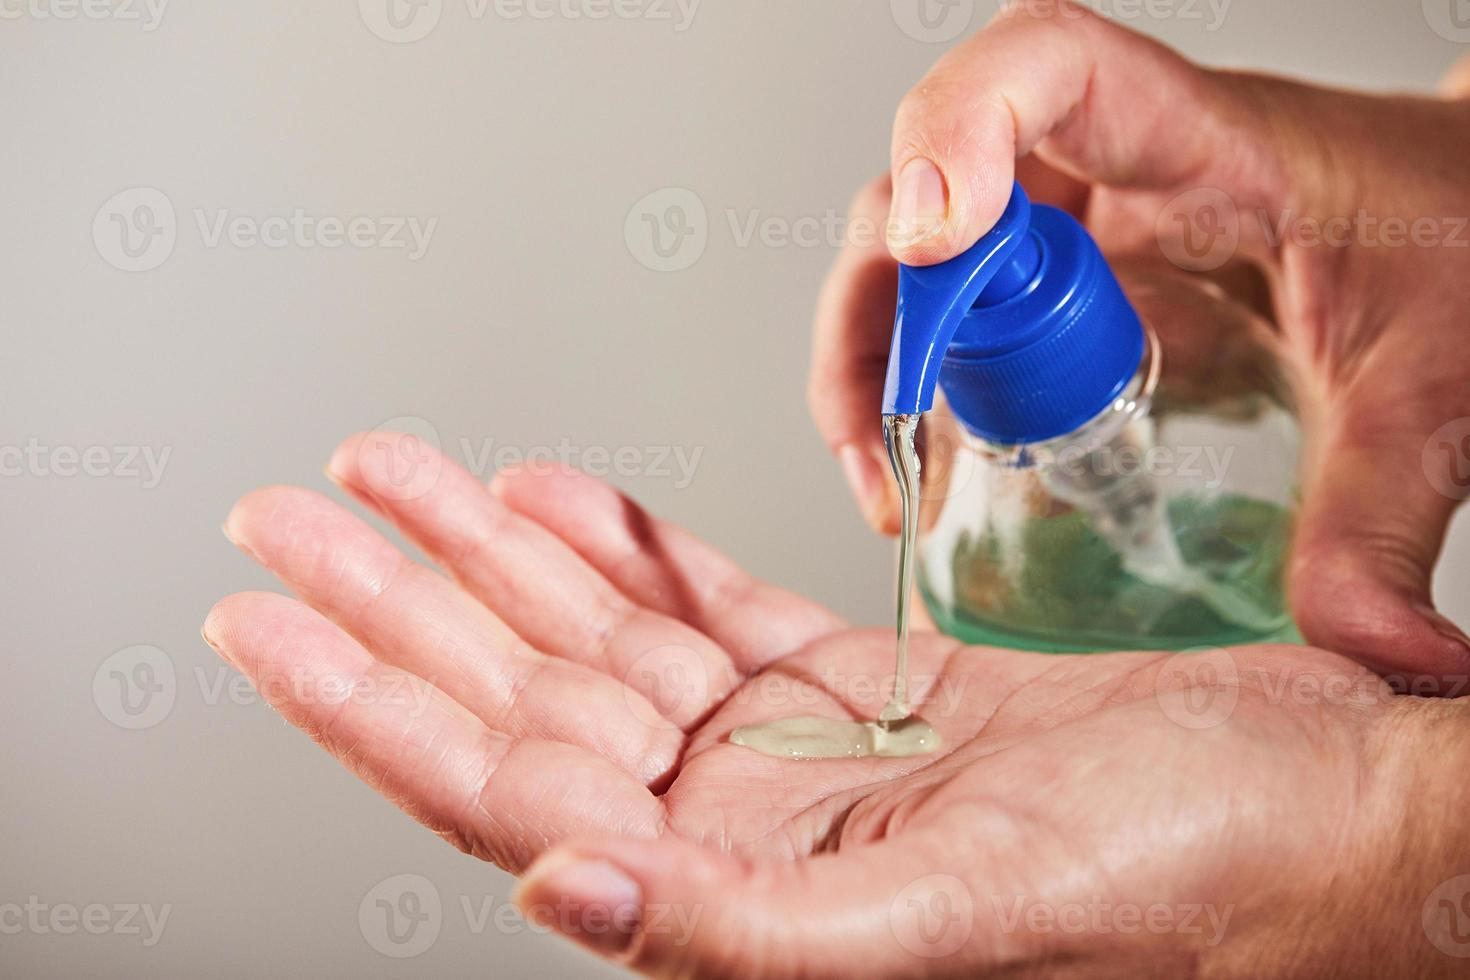 Cleansing hands with hand sanitizer gel photo